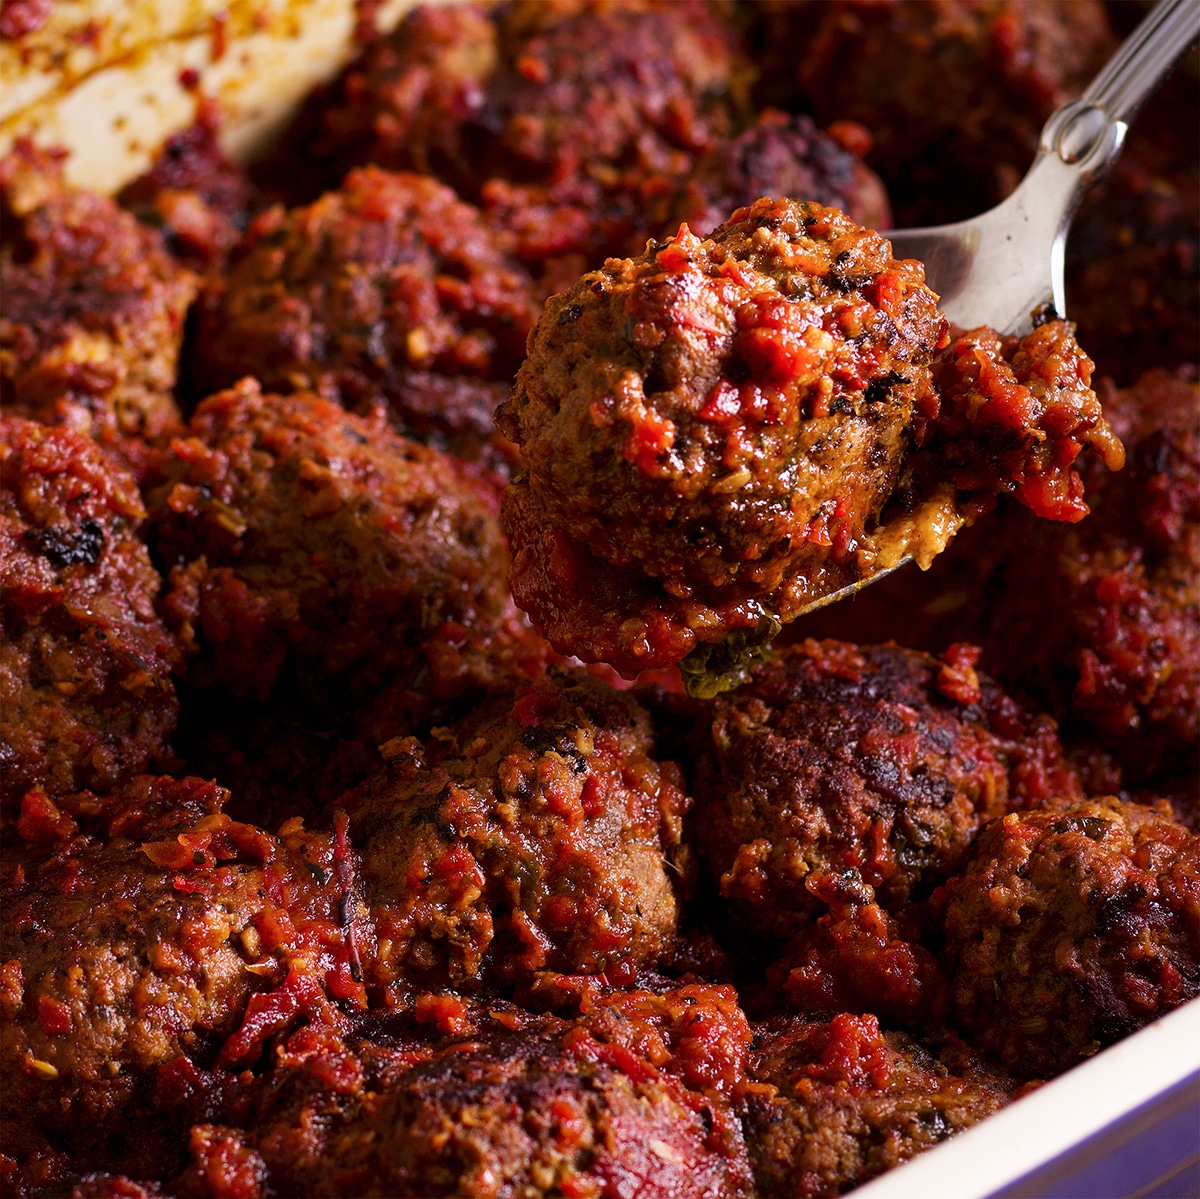 A baking dish filled with meatballs in marinara, freshly baked and ready to serve.